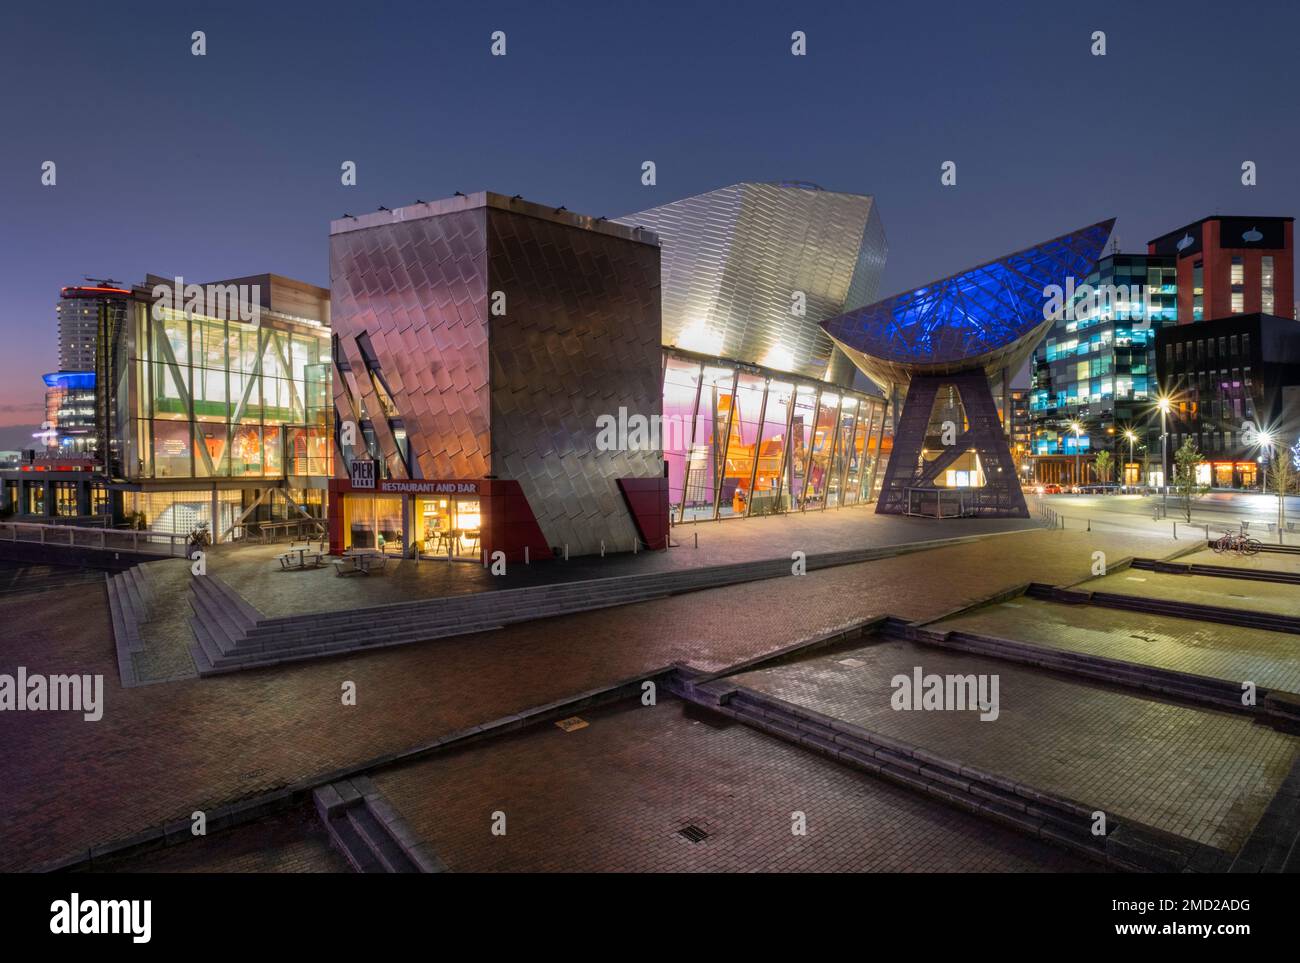 The Lowry Centre at night, Salford Quays, Salford, Manchester, England, UK Stock Photo